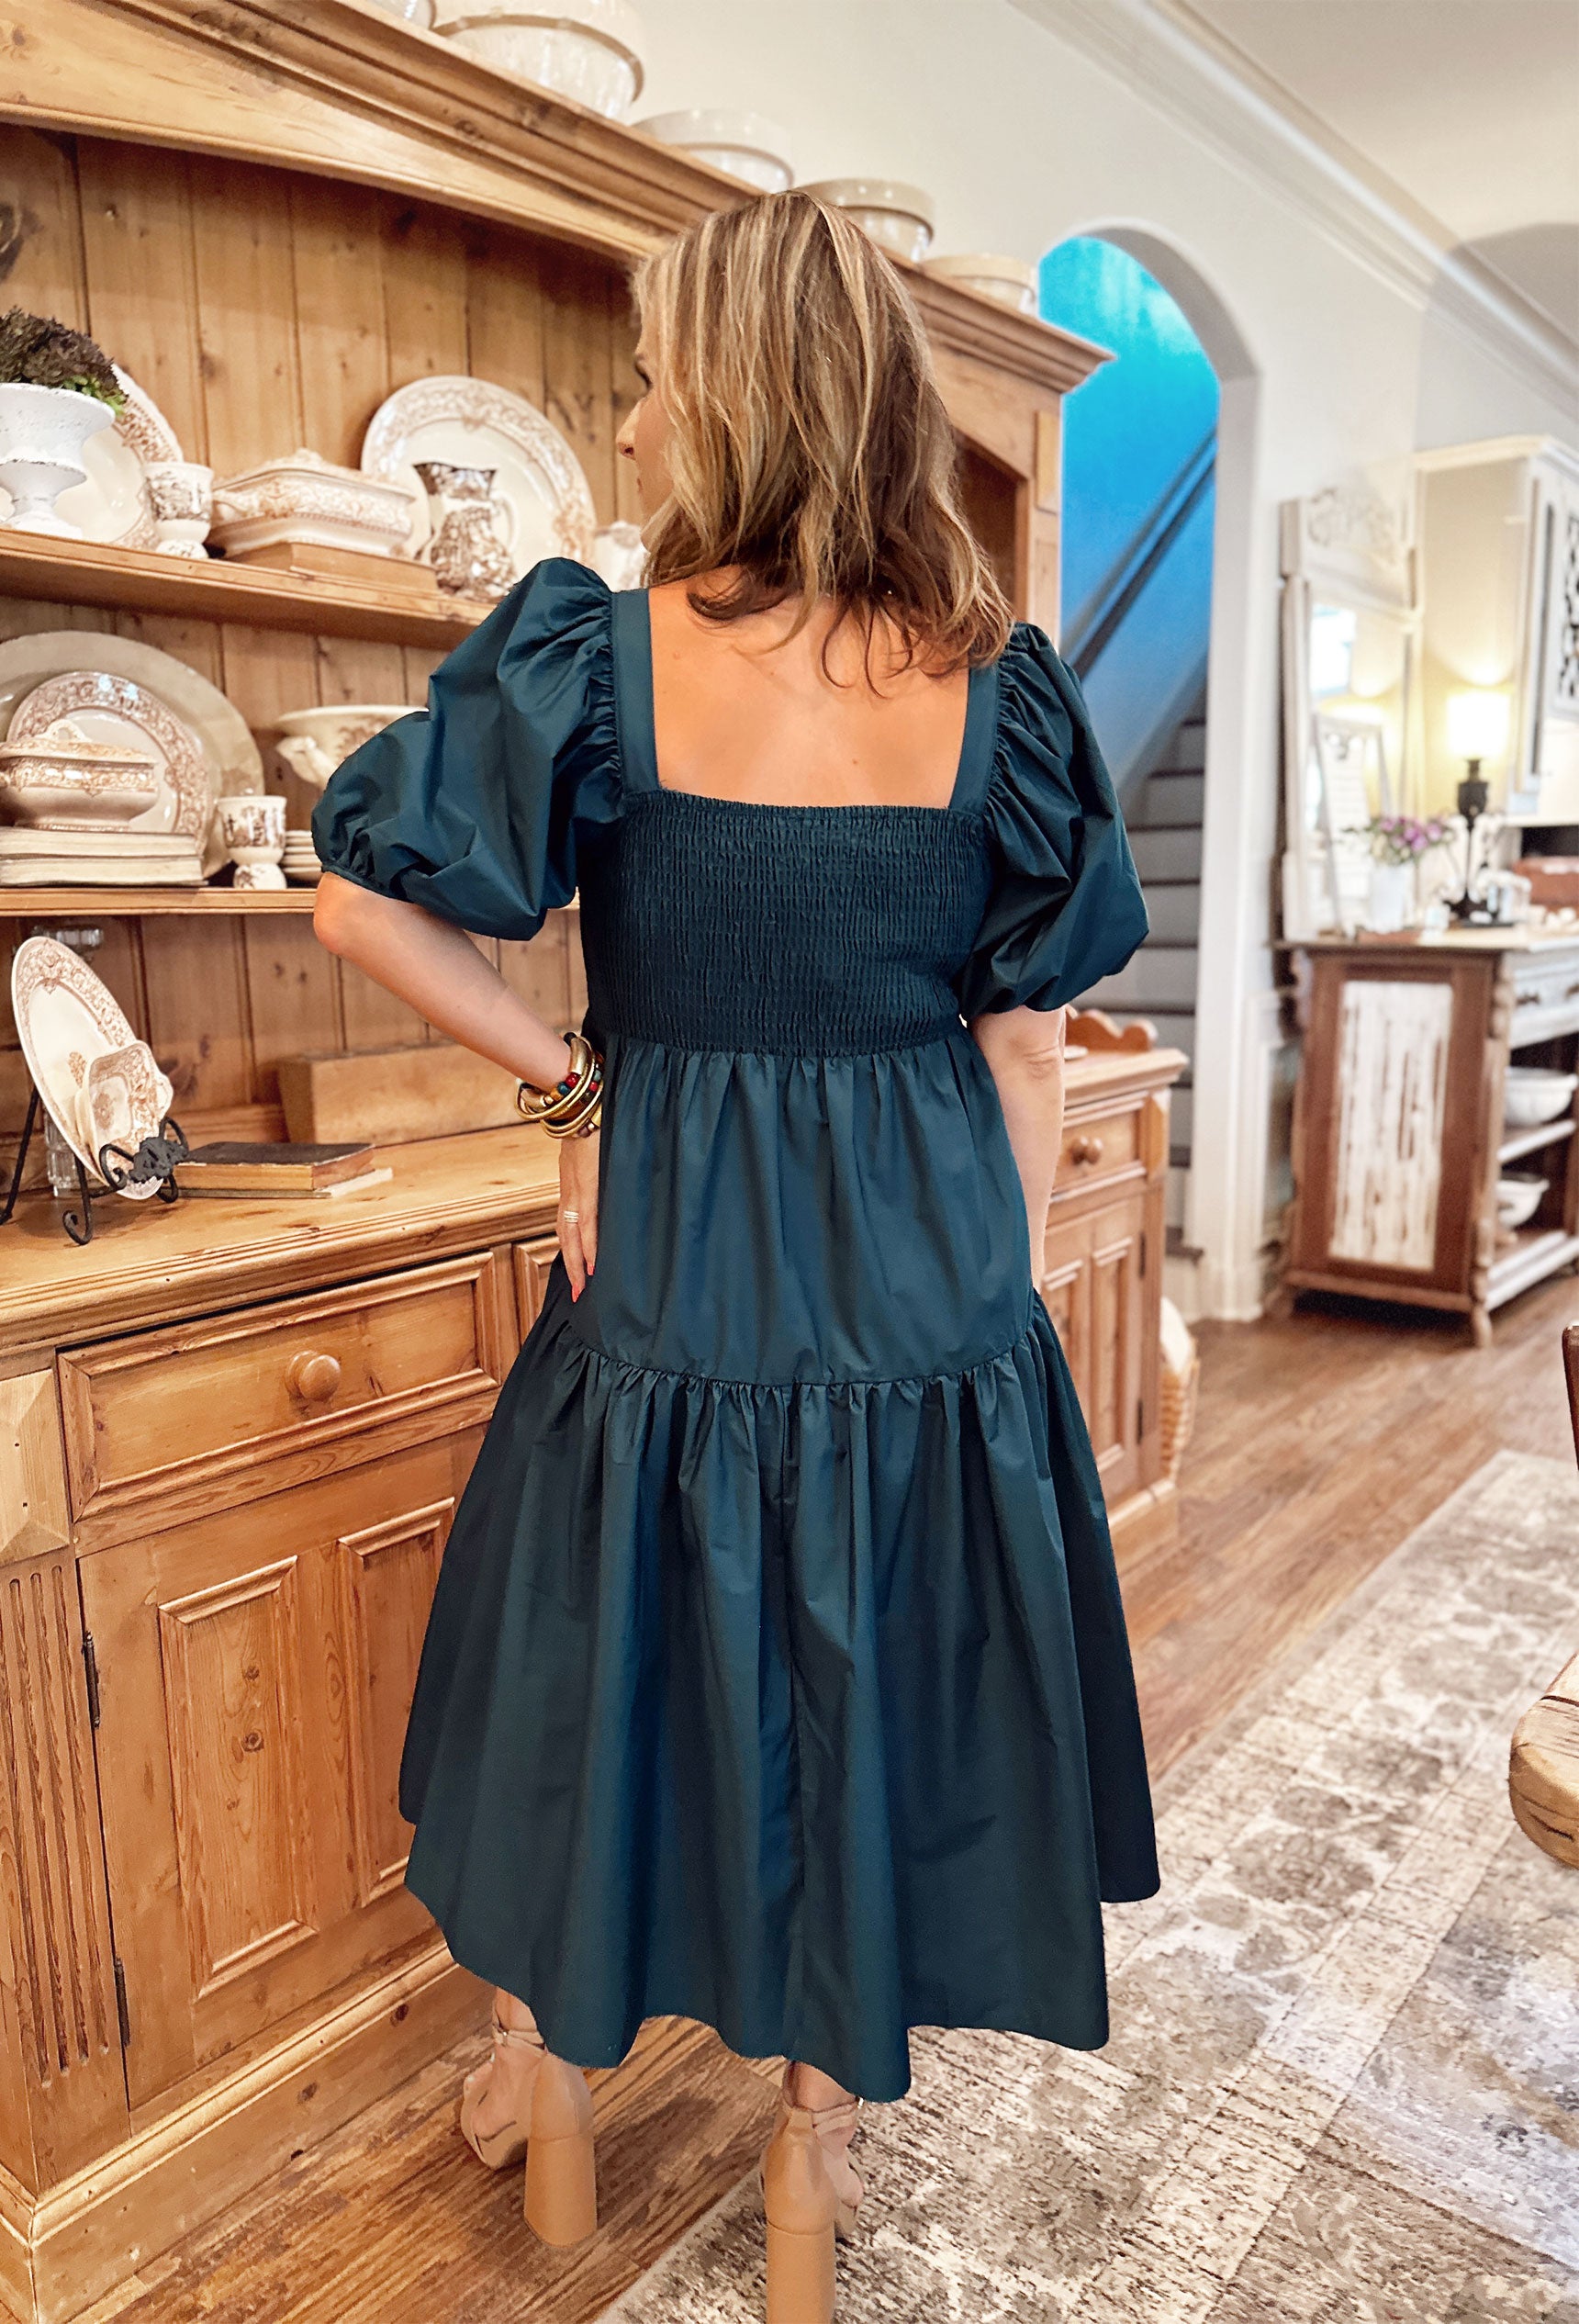 Think of Me Midi Dress in Teal Green, tiered dress, puff sleeves, square neckline, midi dress